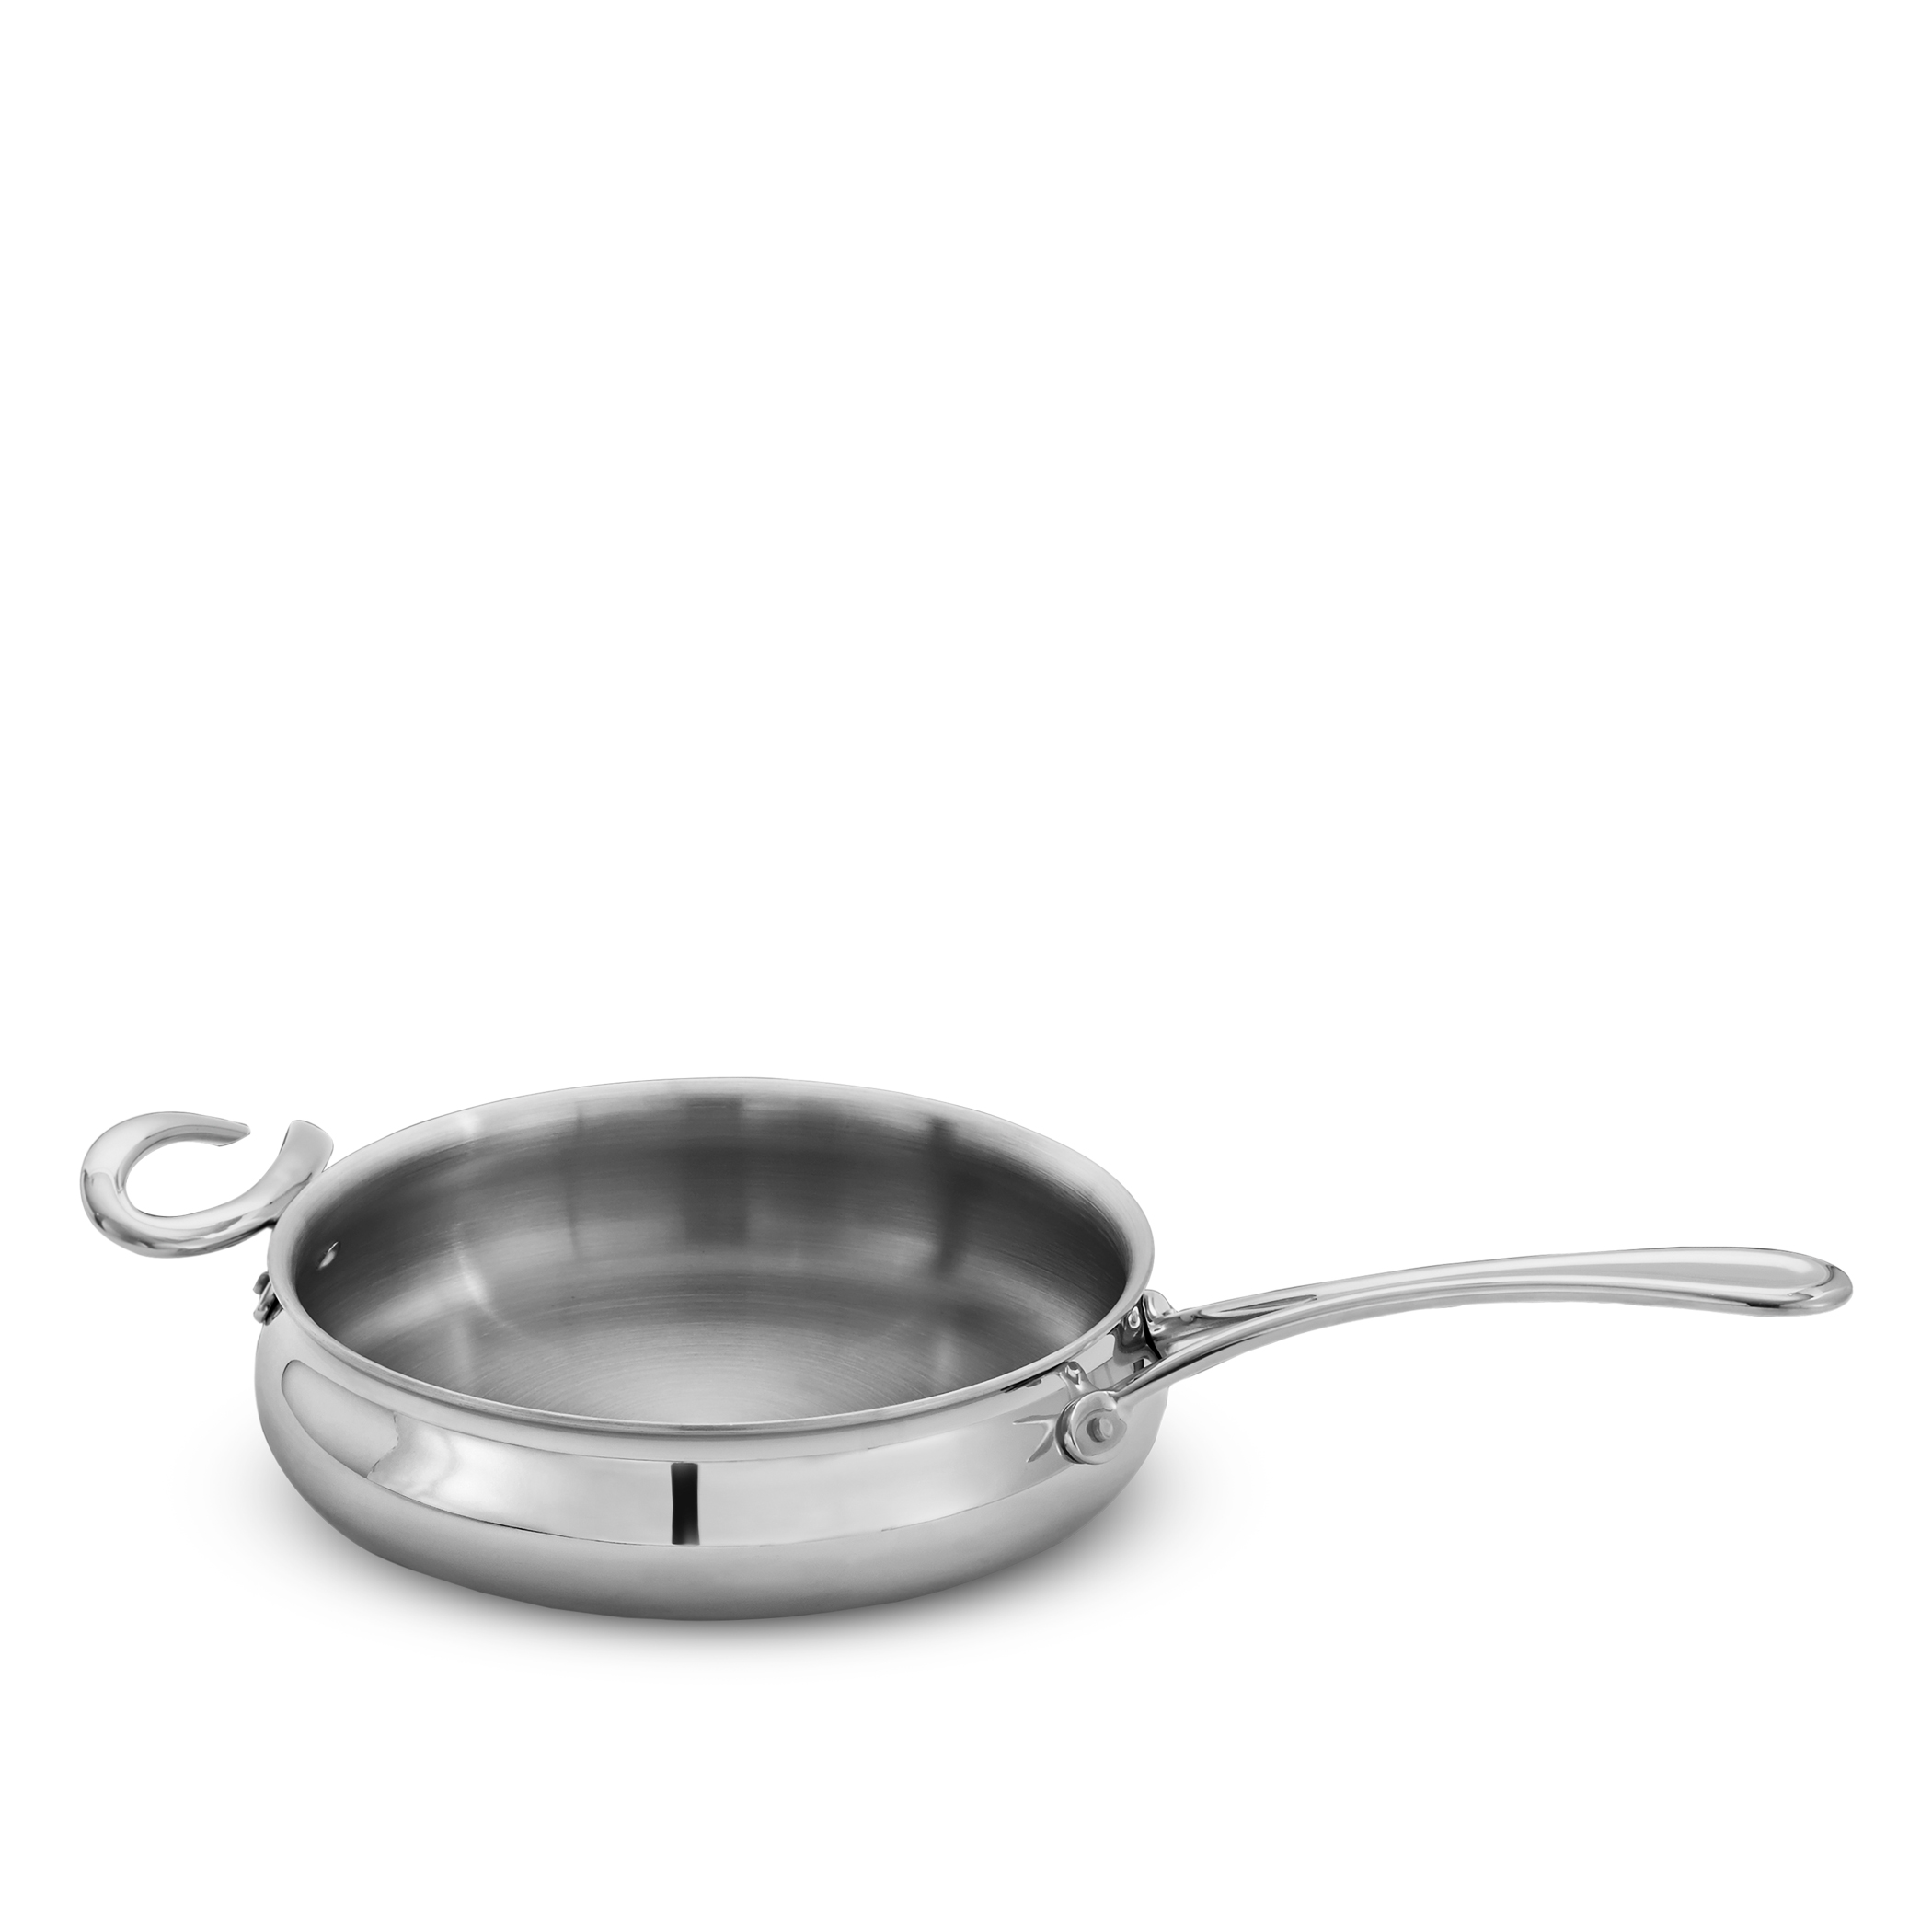 https://www.nambe.com/on/demandware.static/-/Sites-master/default/dwbcf485ab/products/large/MT1112_CookServ_Fry_Pan_10in_alt.jpg